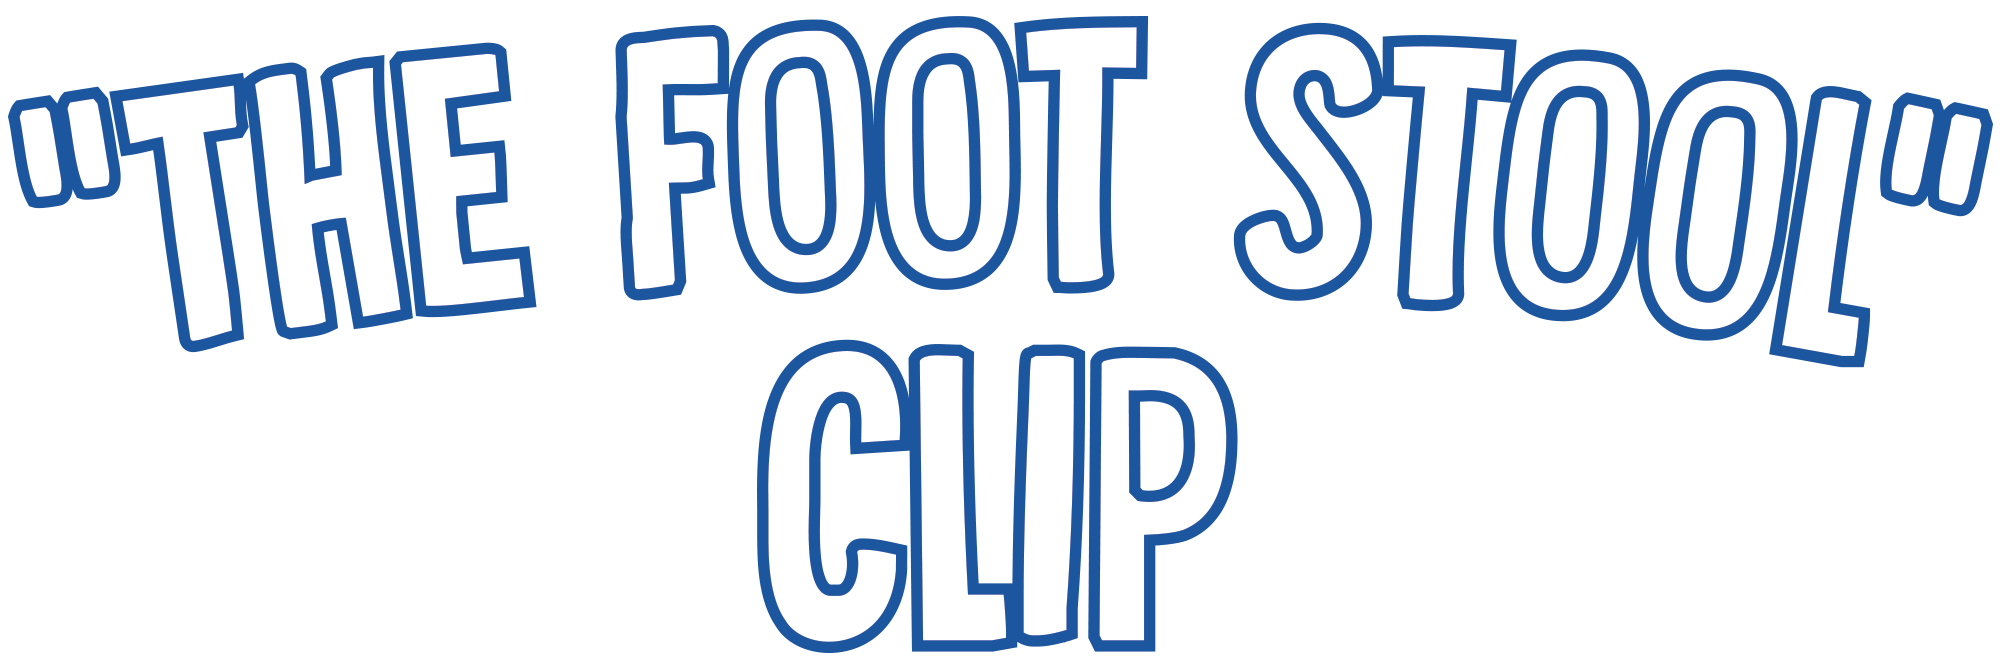 "The Foot Stool" Clip typographic title in white/blue stroke outline